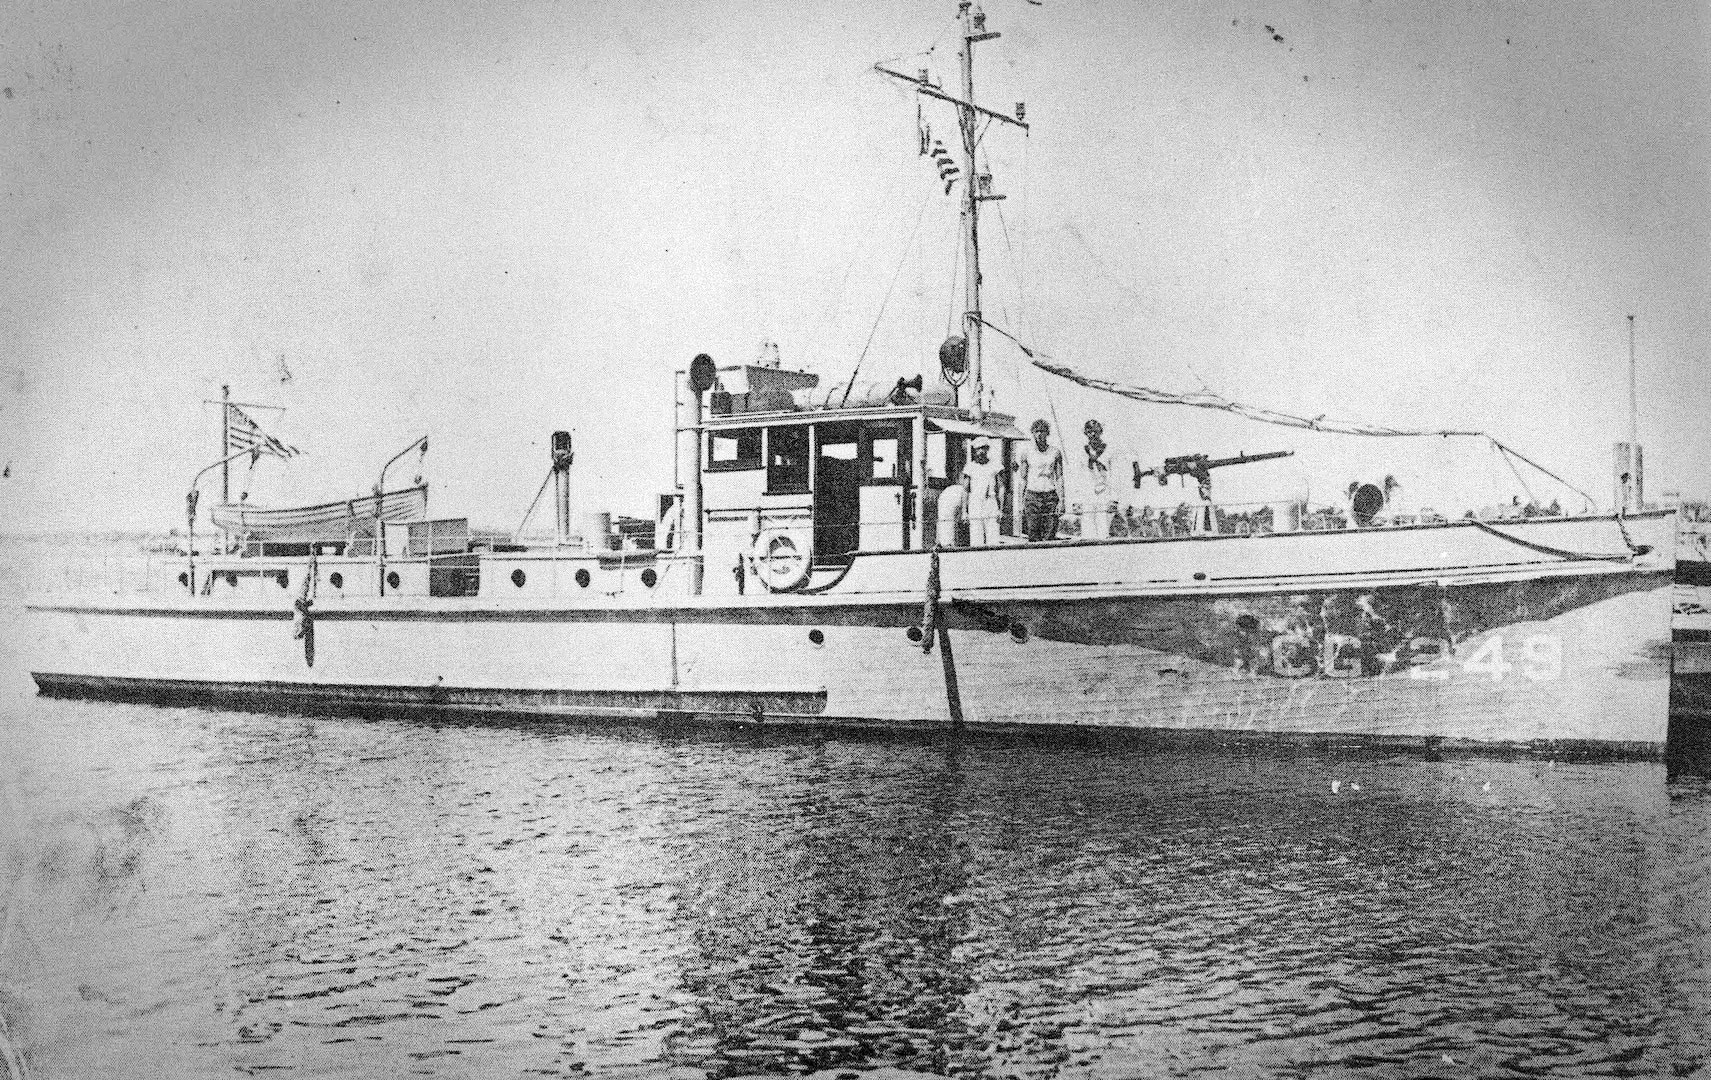 Photograph of the 75-foot patrol boat CG-249 from around the time of the James Alderman incident. (From The Hanging at Bahia Mar by Hal Caudle)